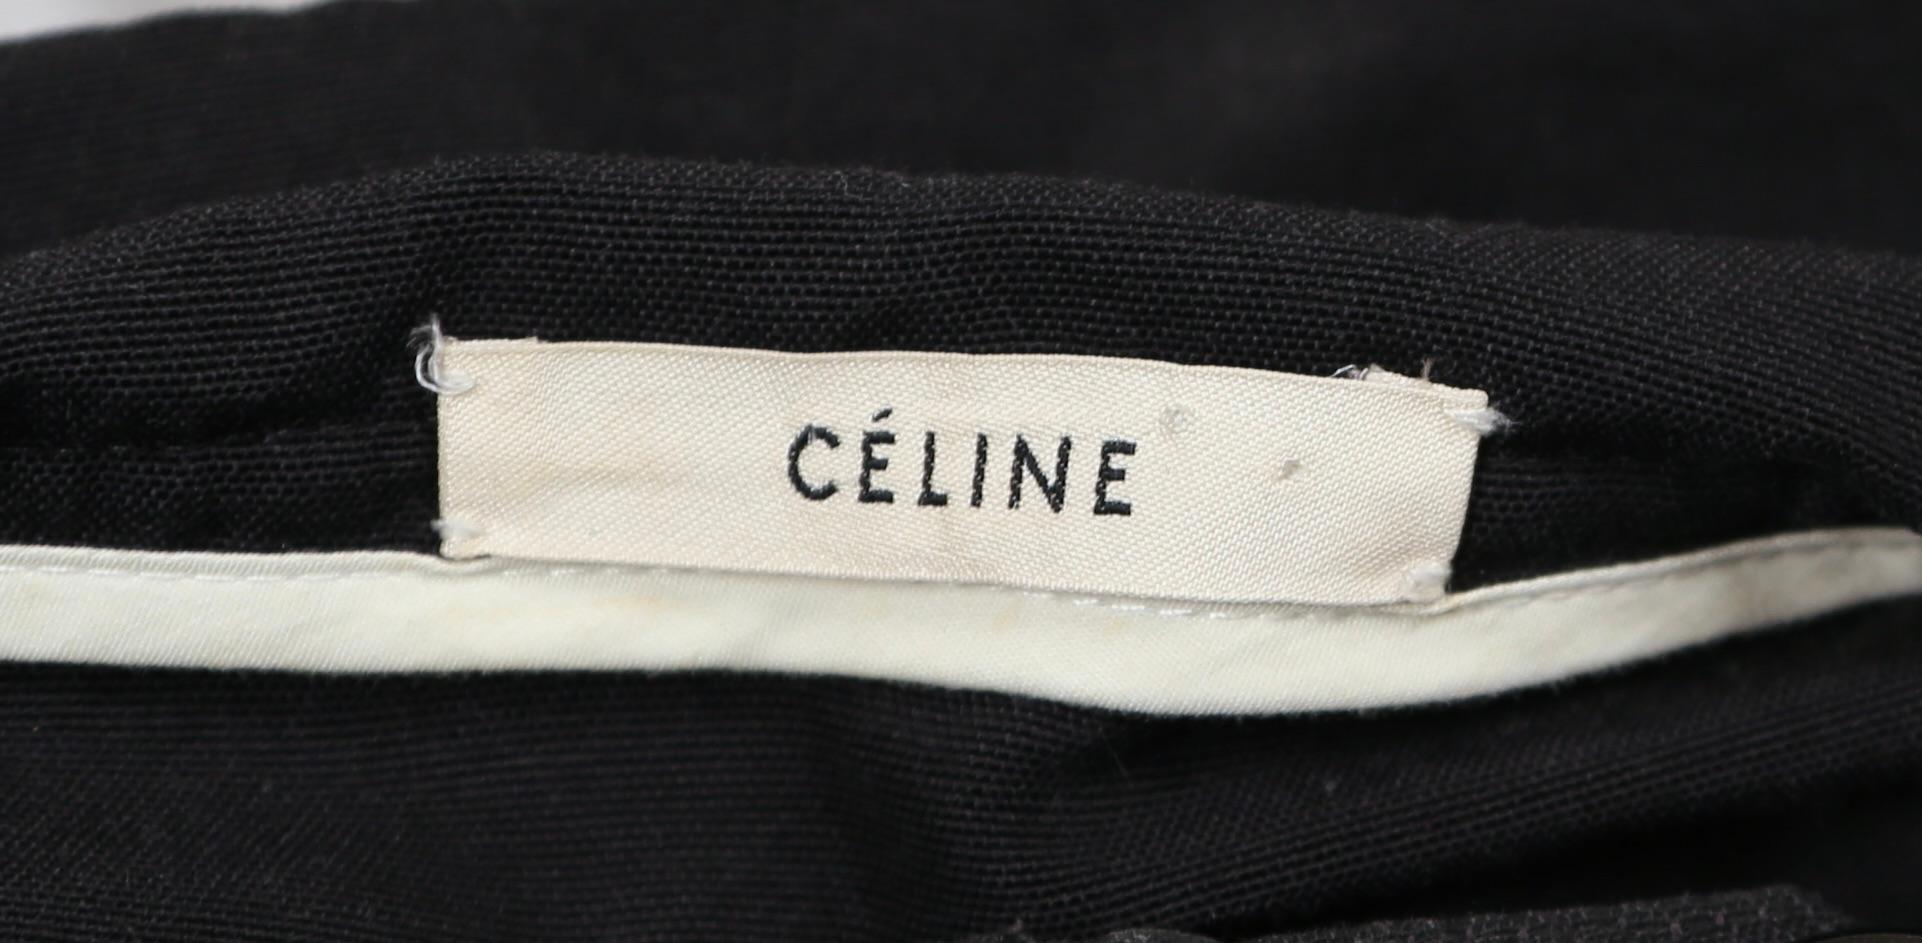 2011 Celine By PHOEBE PHILO deep navy blue anorak jacket in cotton For Sale 3